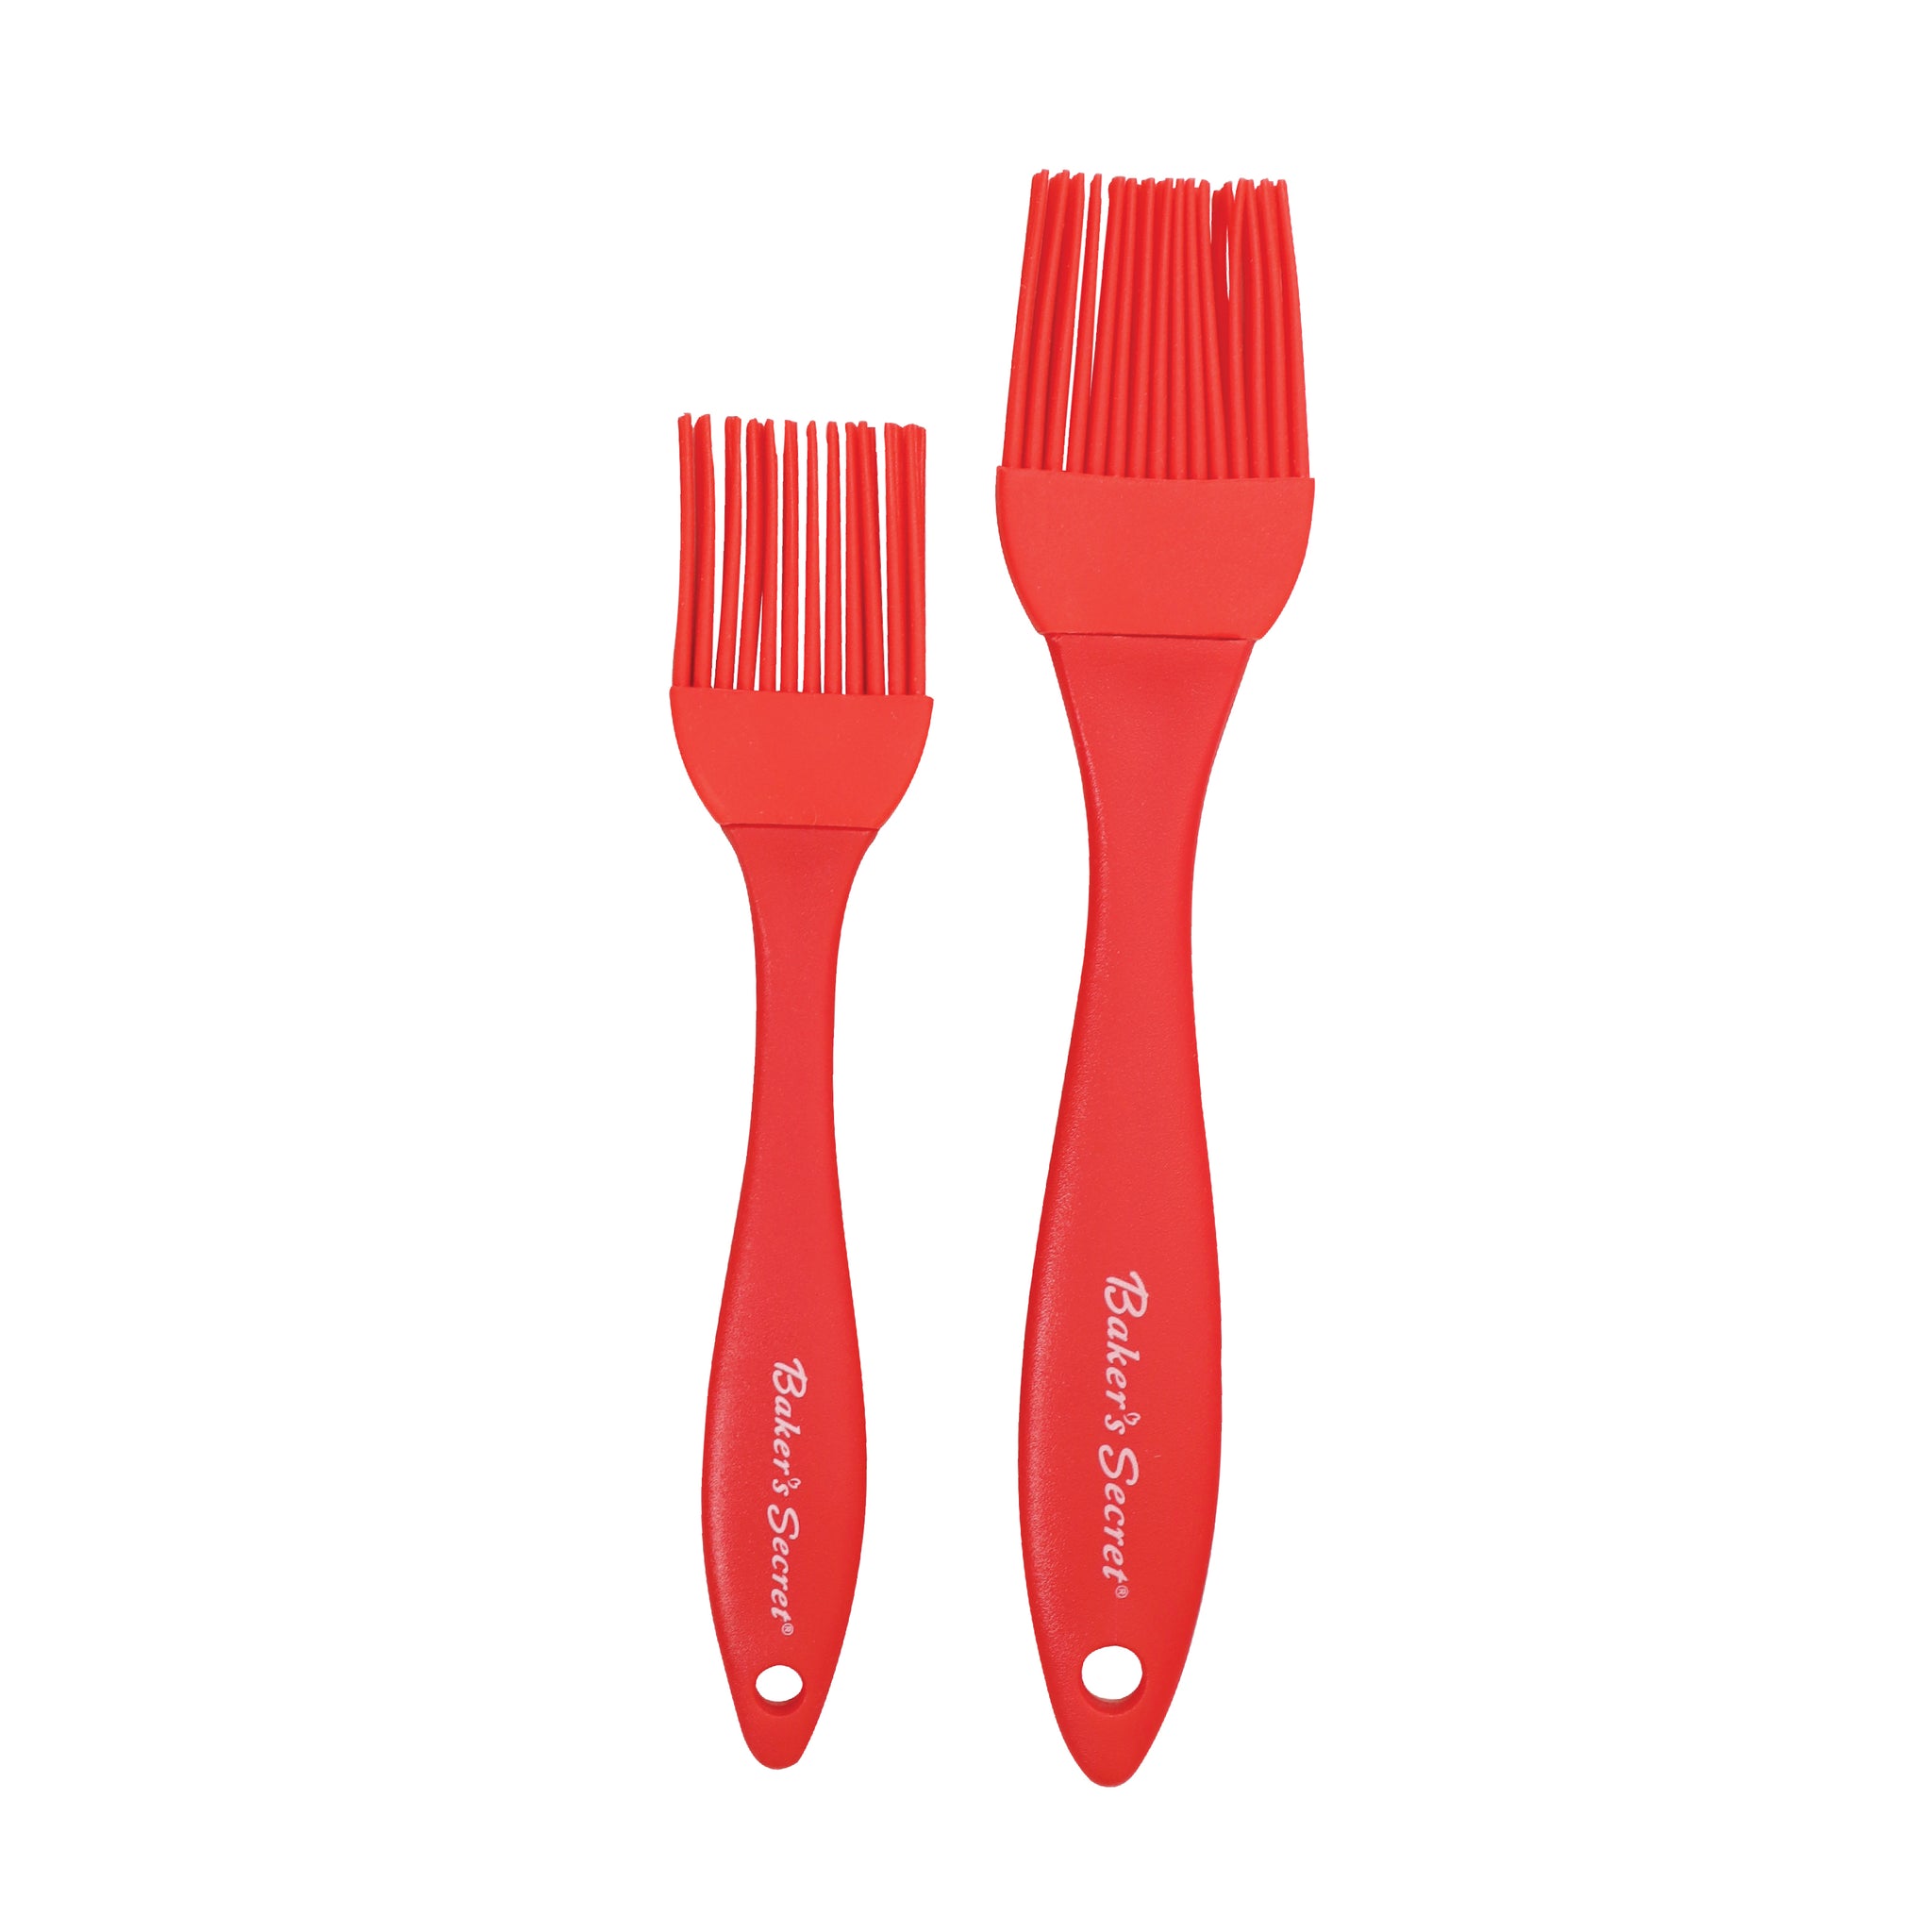 Silicone Brushes Set of 2 Red Cookware Accessories - Baker's Secret